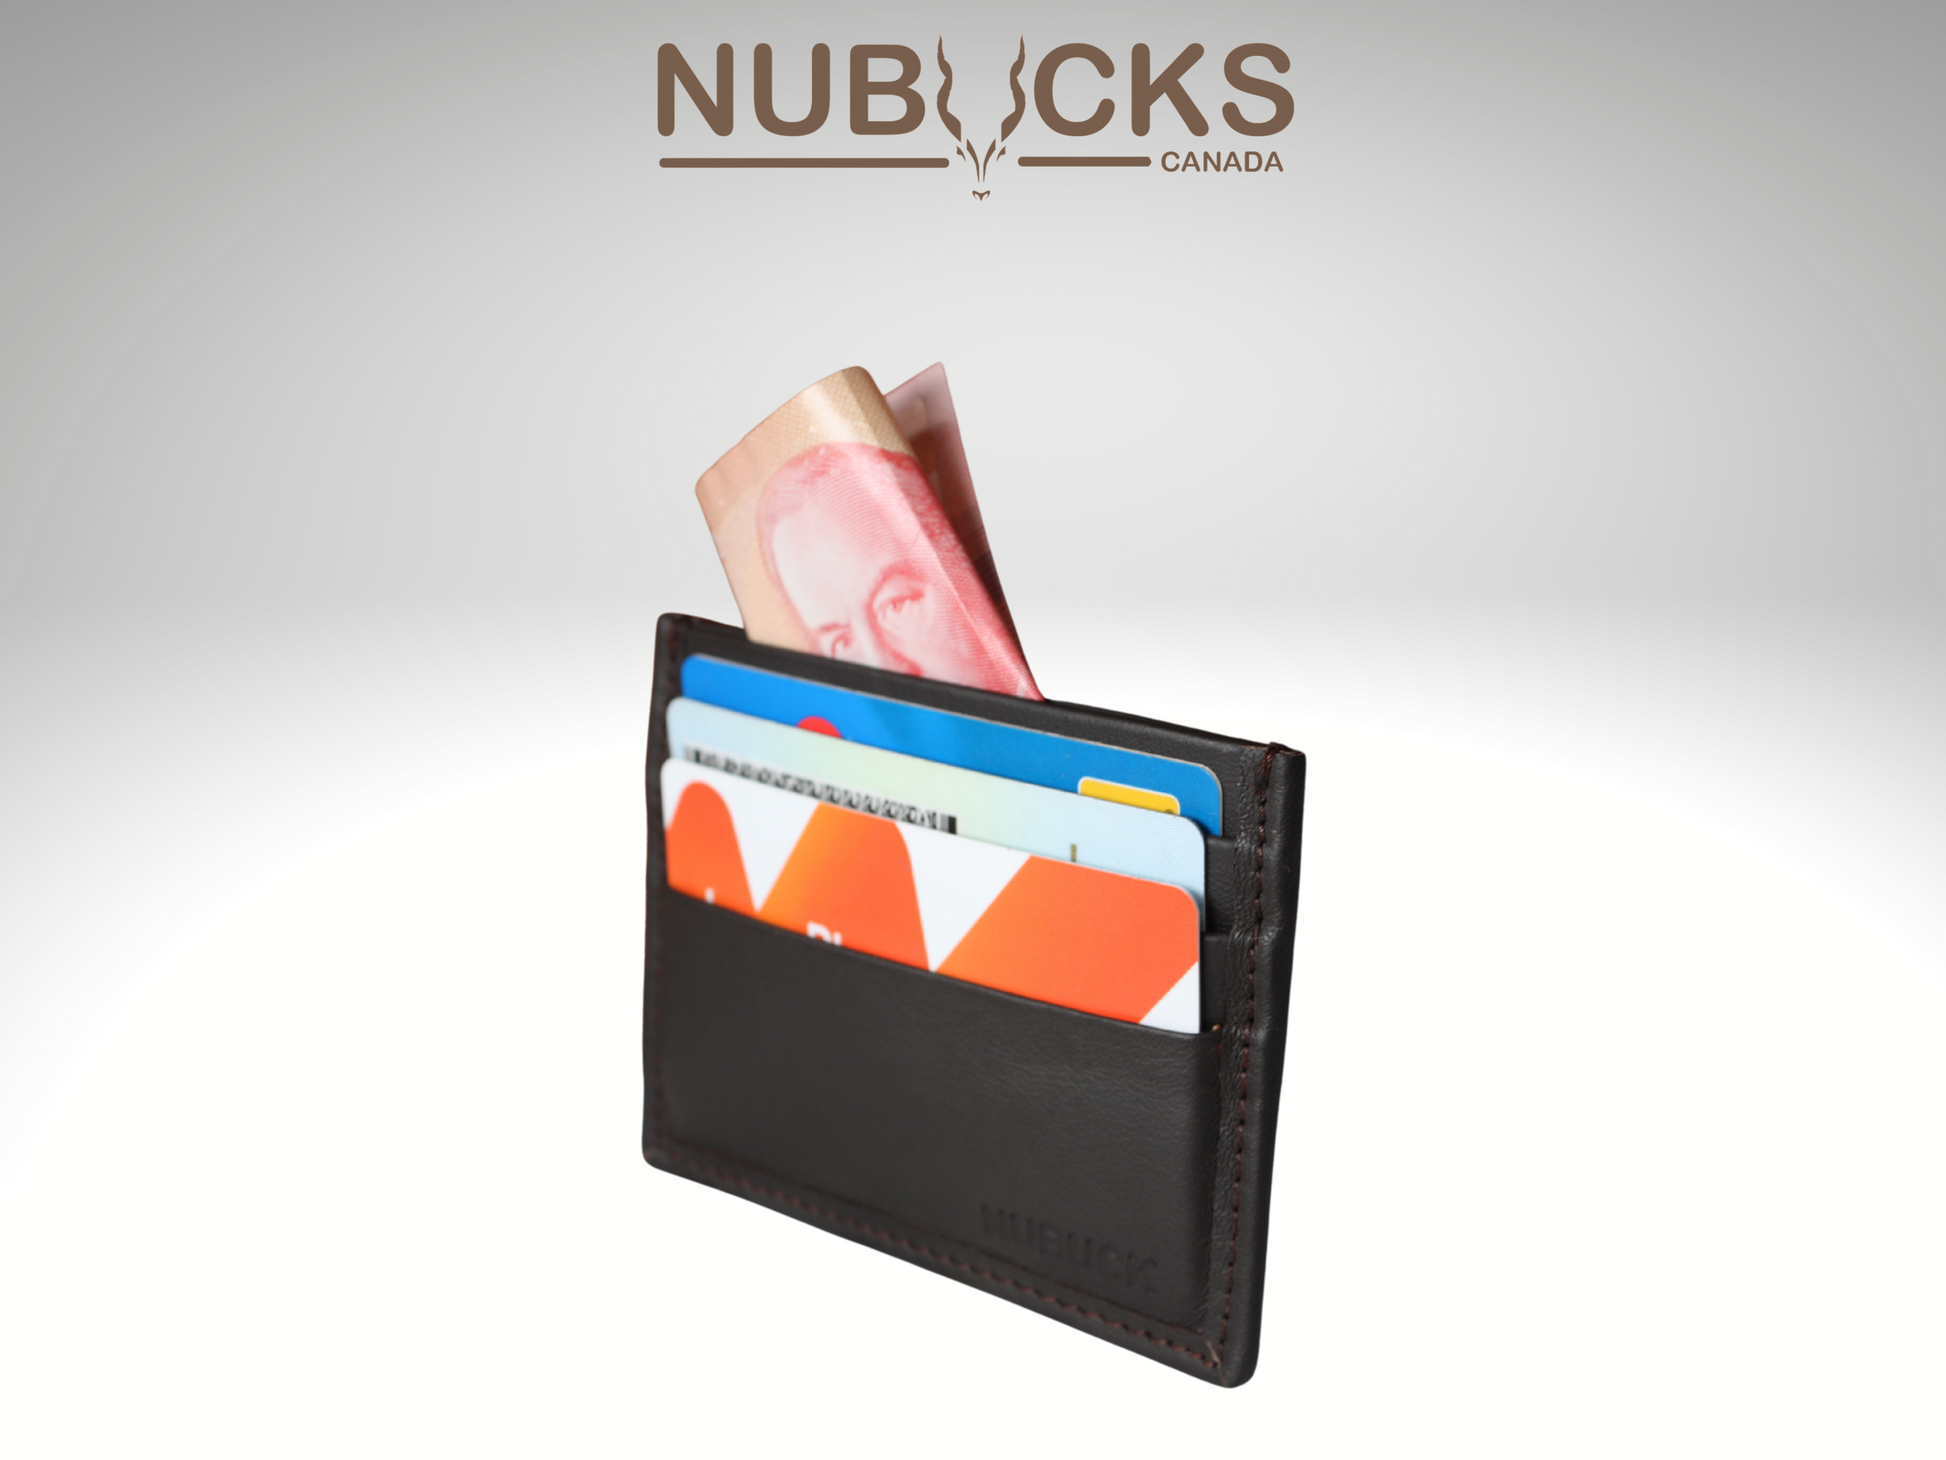 nubucks canada card keeper with 6 cards and $50 bill in cash slot